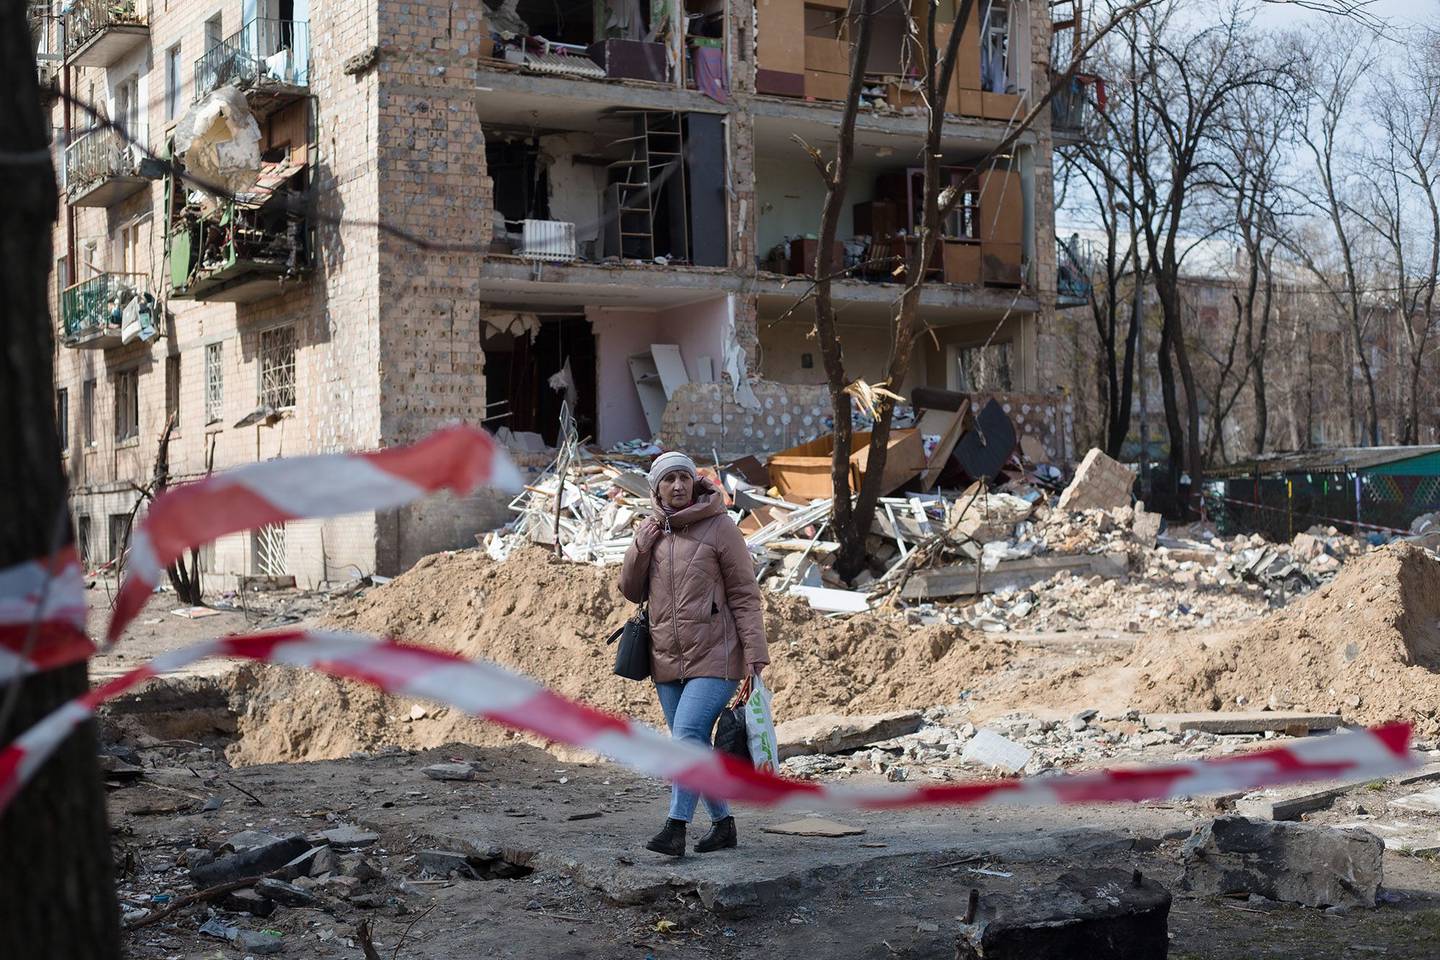 A woman walks past a residential area which was destroyed as a result of a rocket strike two weeks ago on March 28, 2022 in Kyiv, Ukraine.